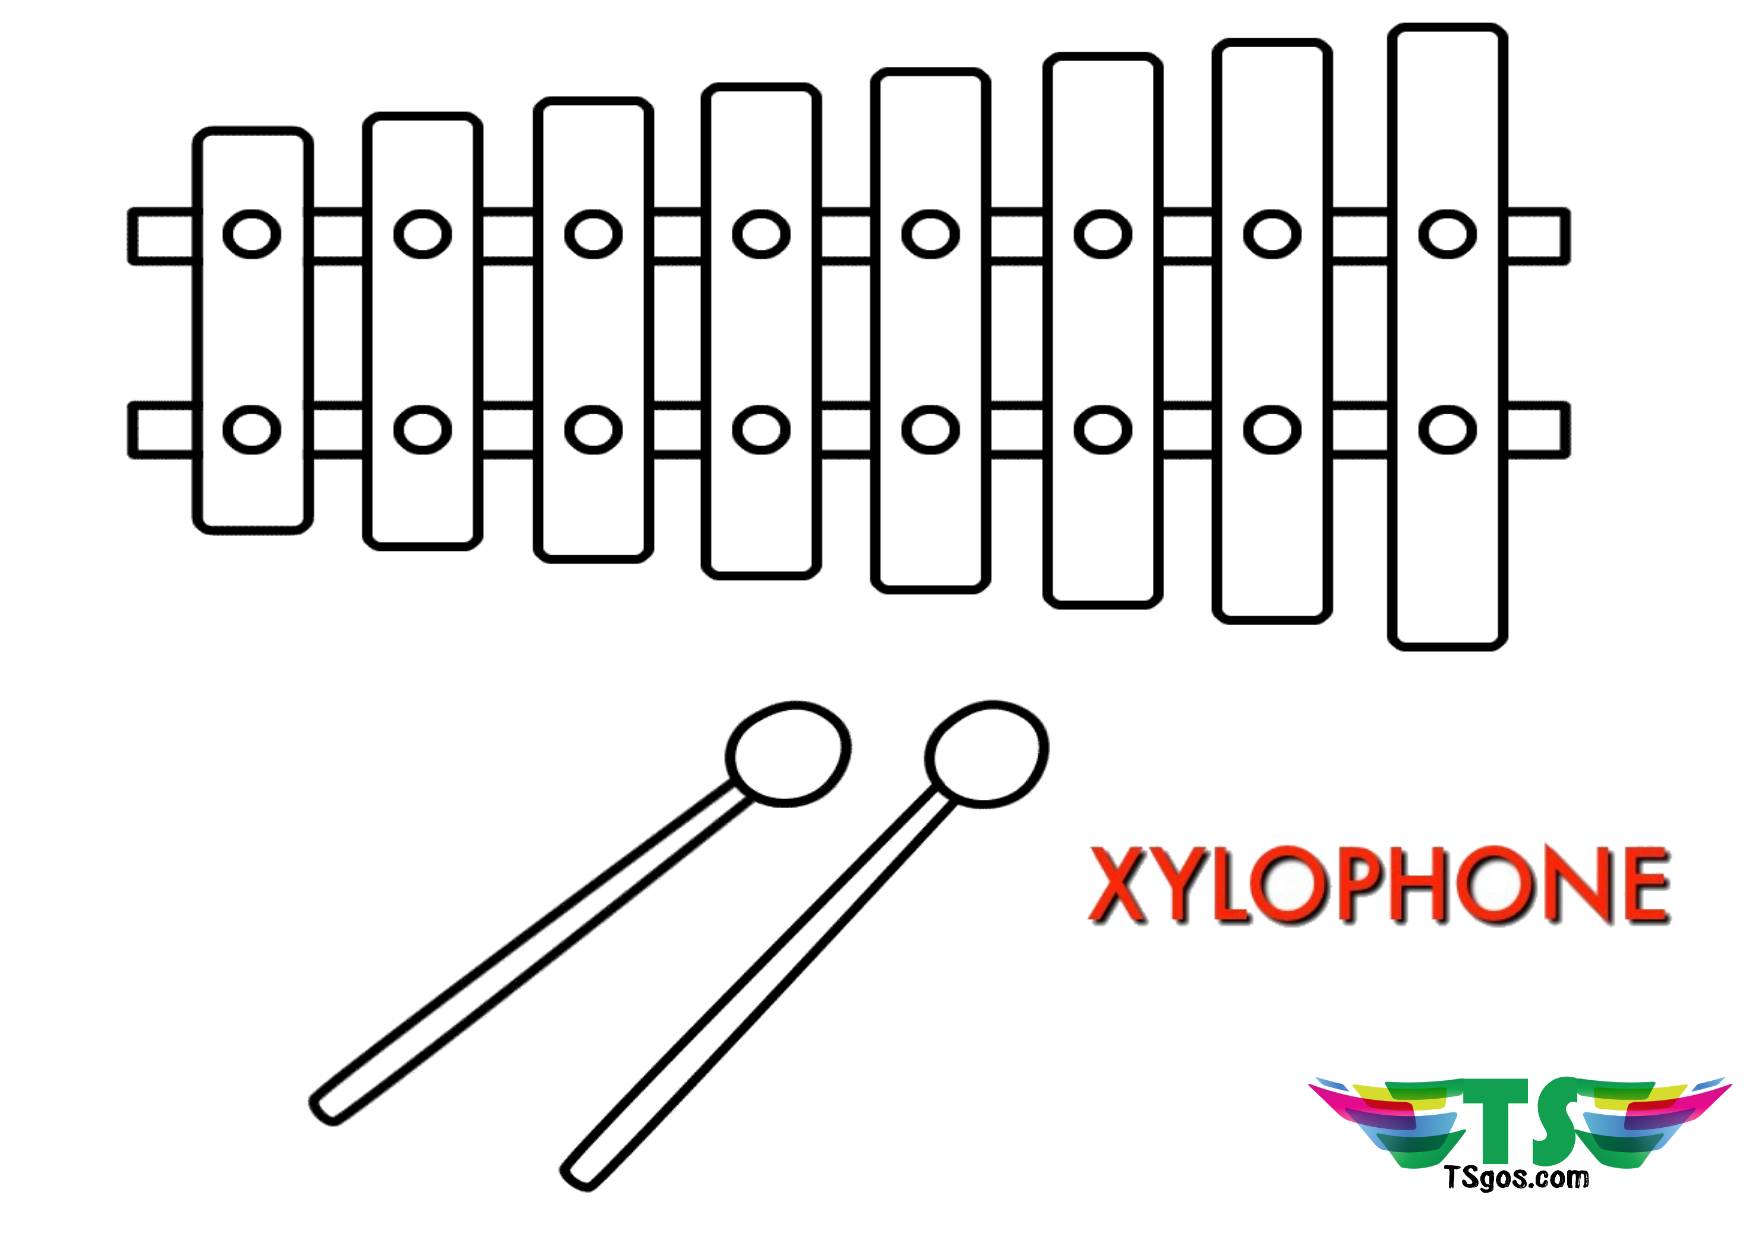 Xylophone musical instruments printable coloring pages for kids